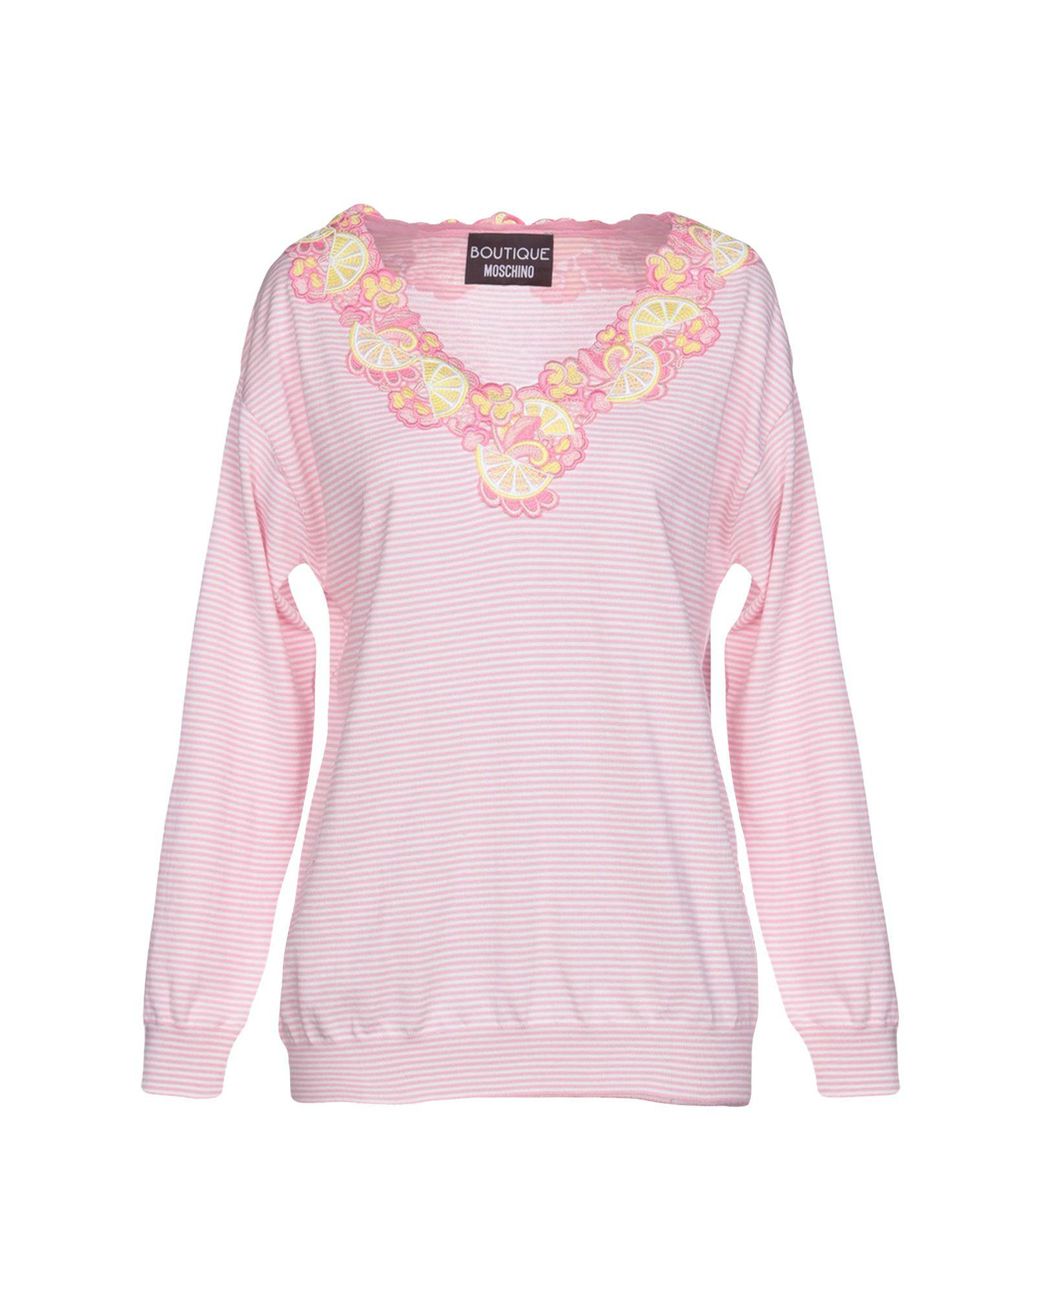 Boutique Moschino Cotton Sweater in Pink - Lyst